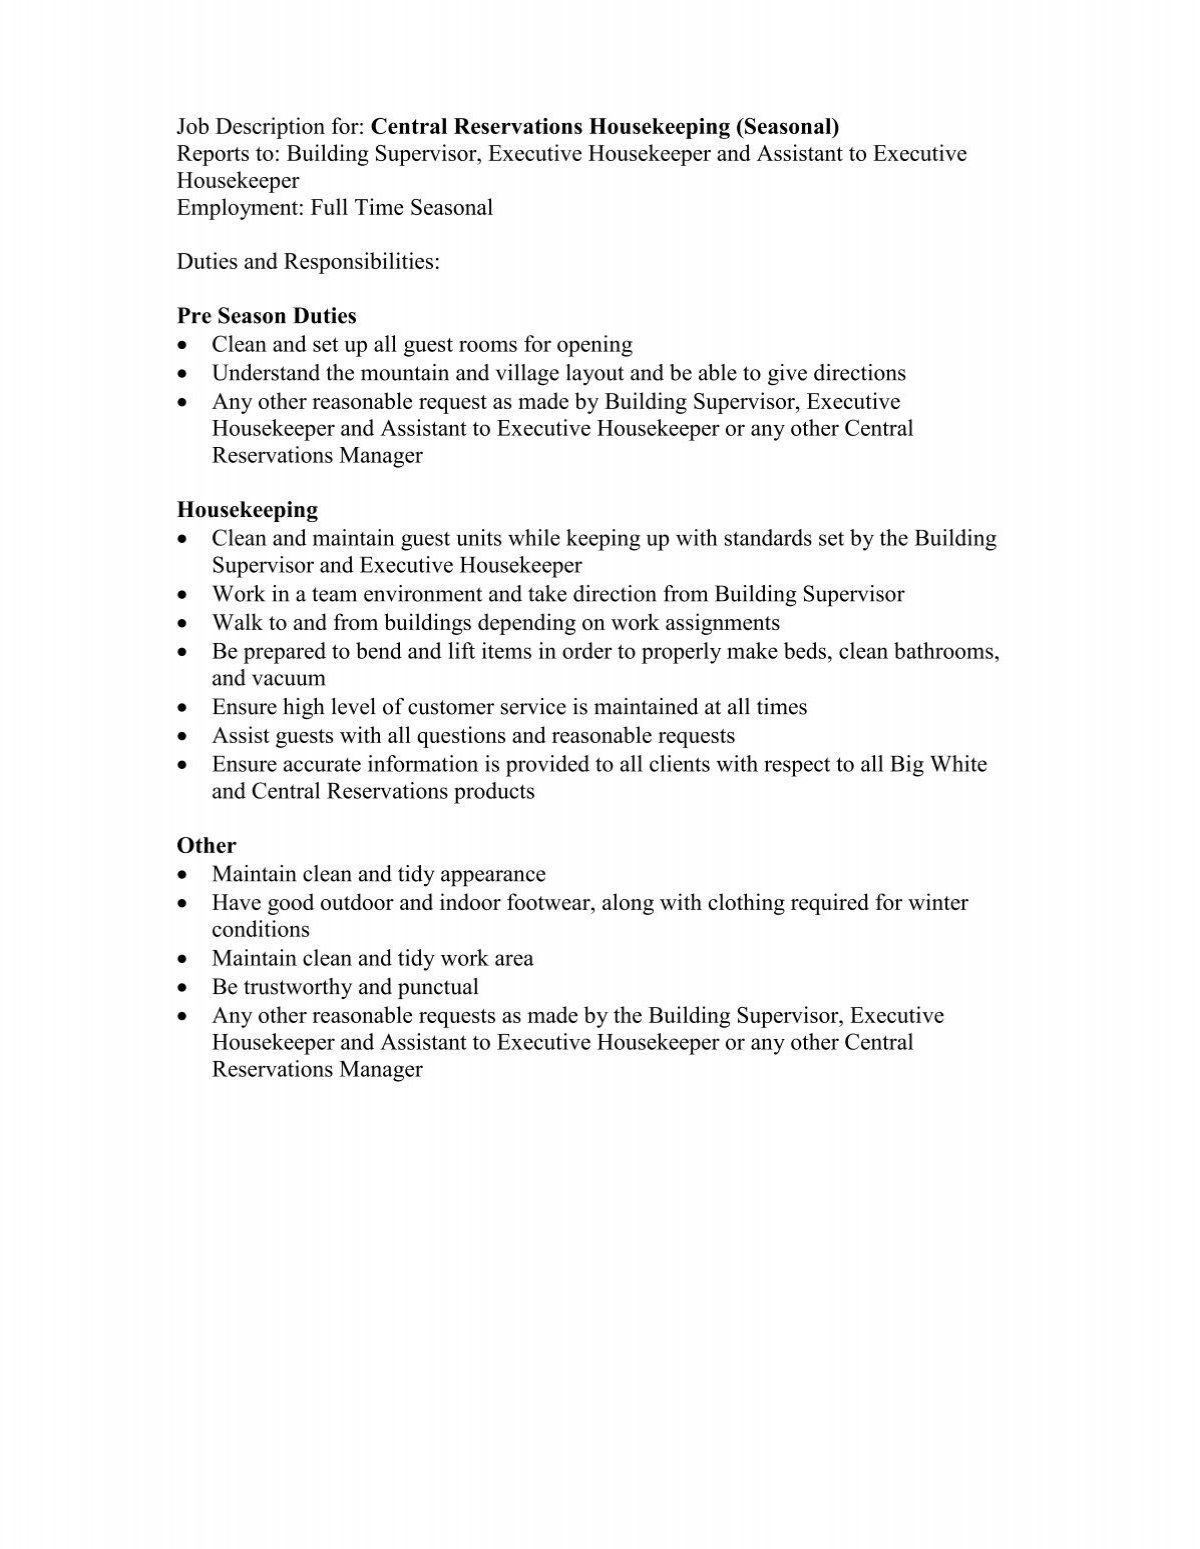 Job Description For: Central Reservations Housekeeping ... - Owh